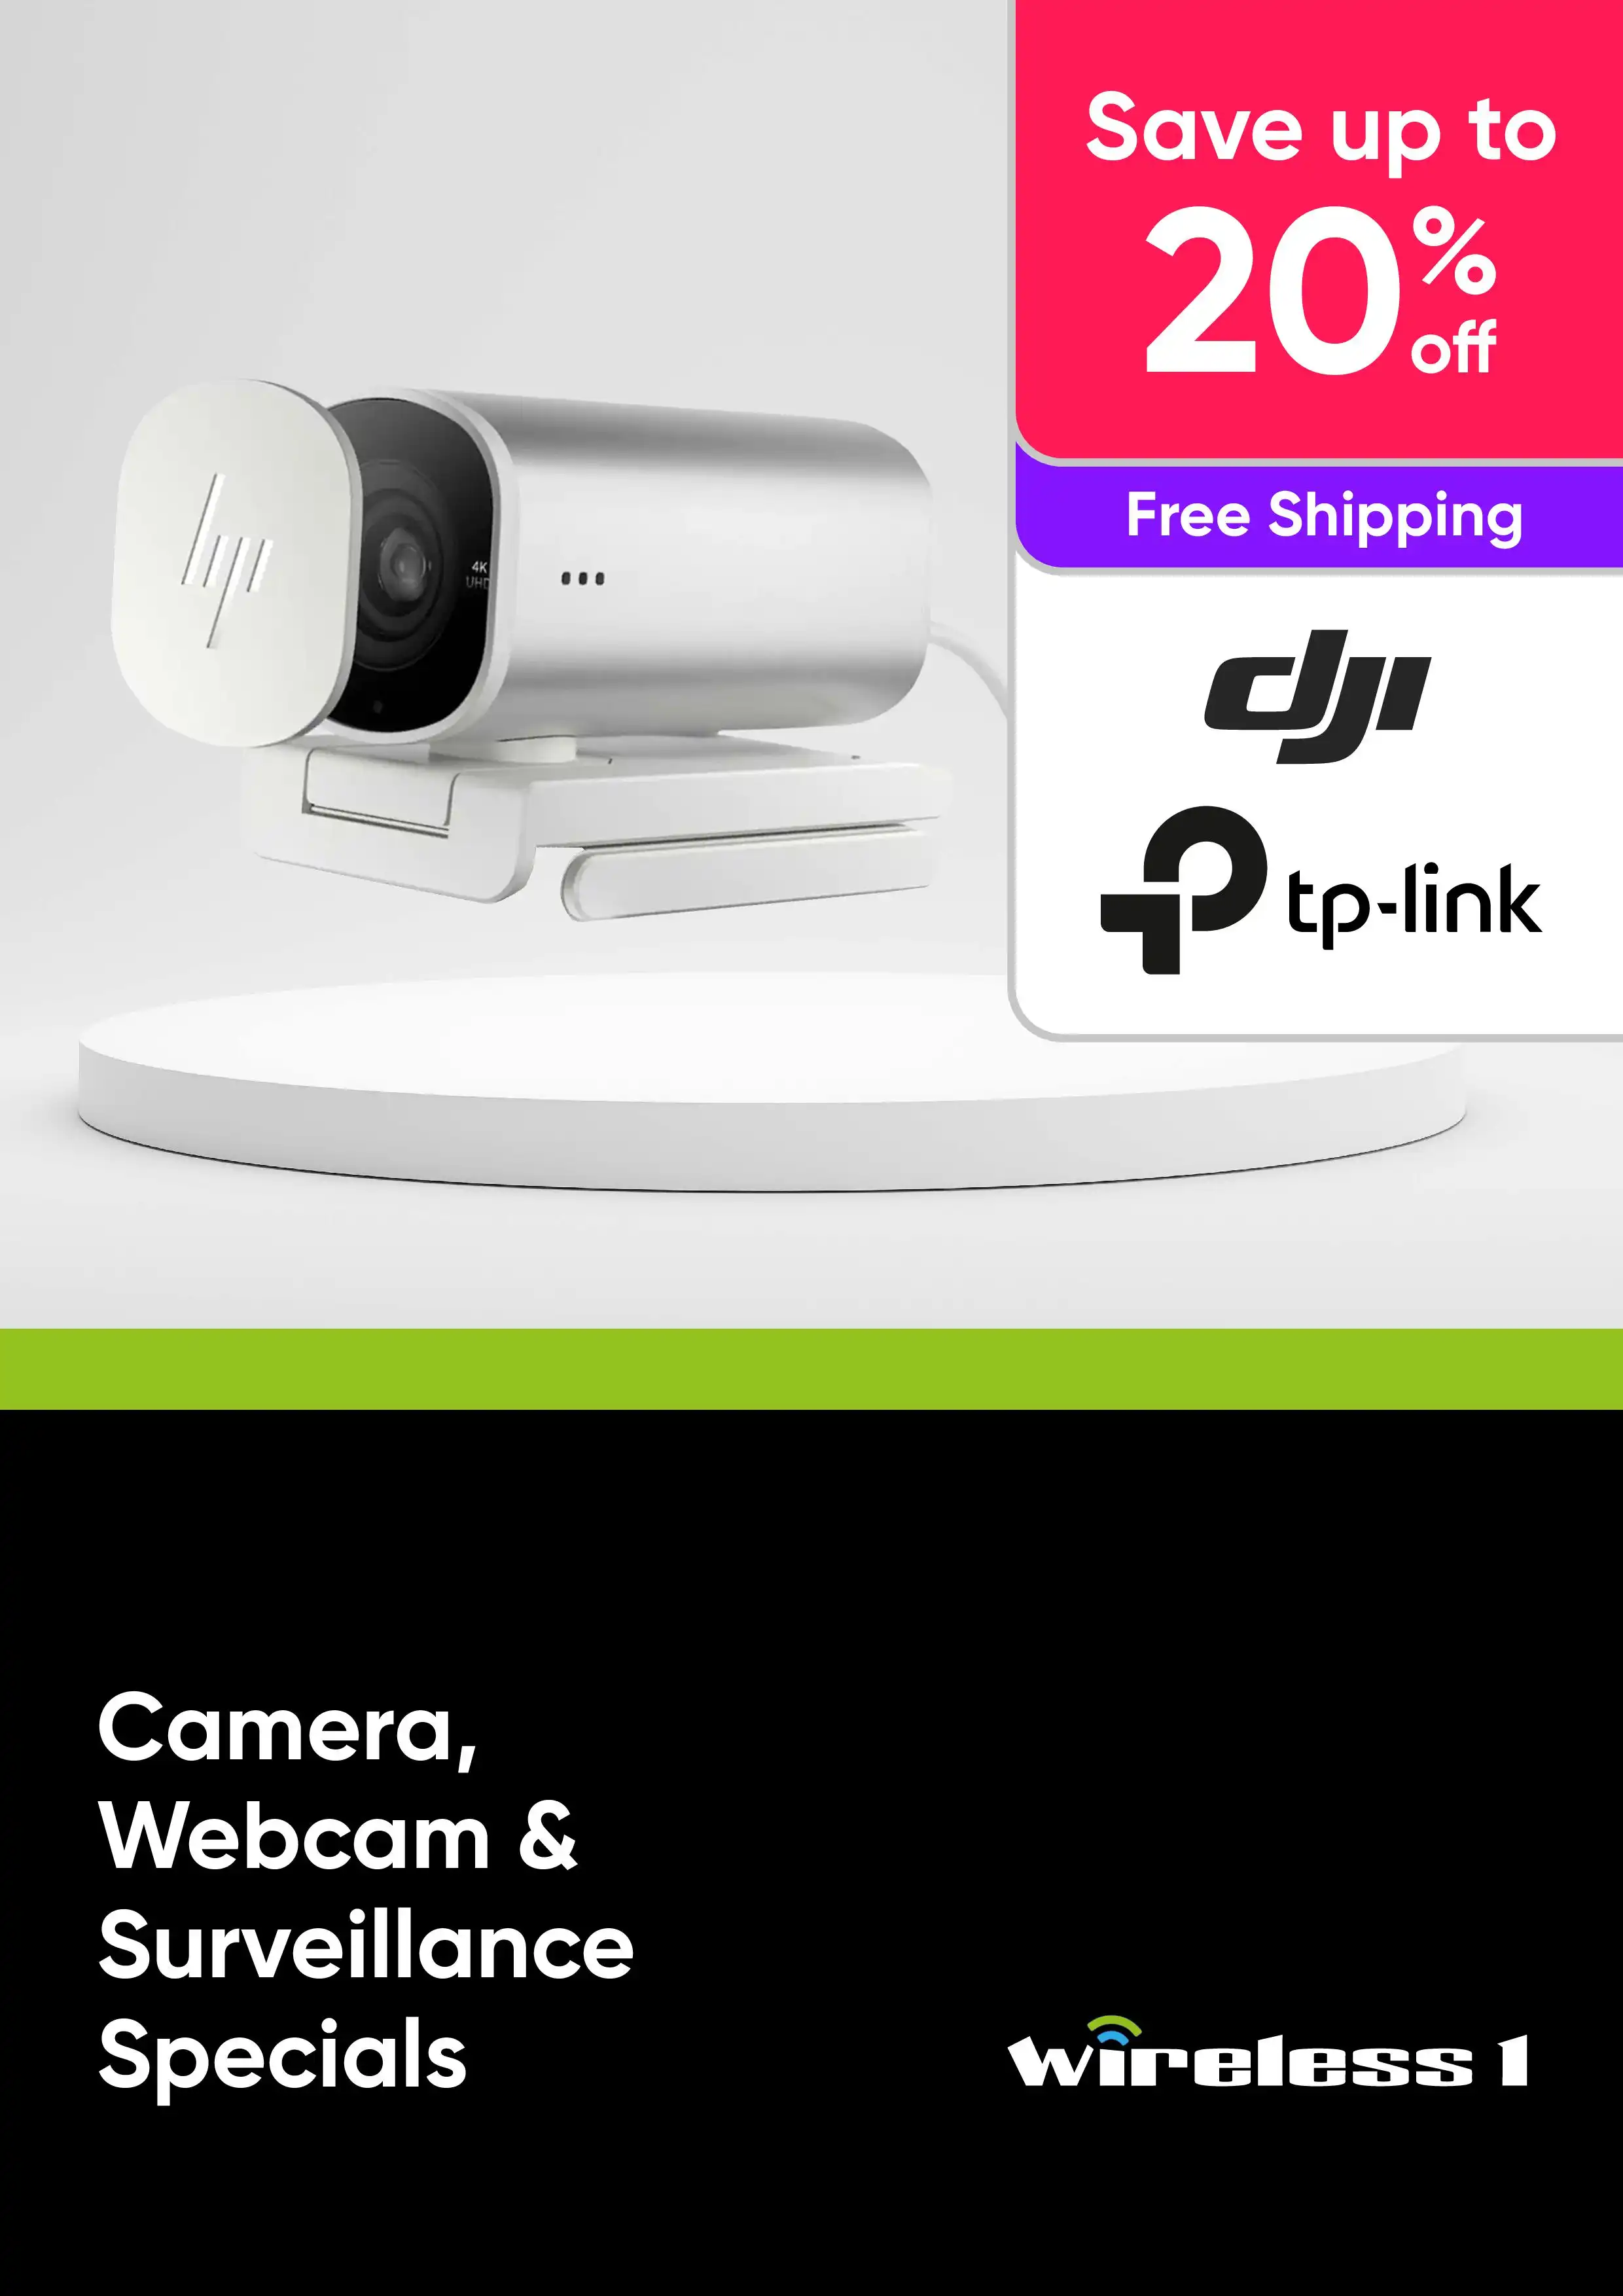 Save up to 20% on Cameras, Webcams & Surveillance